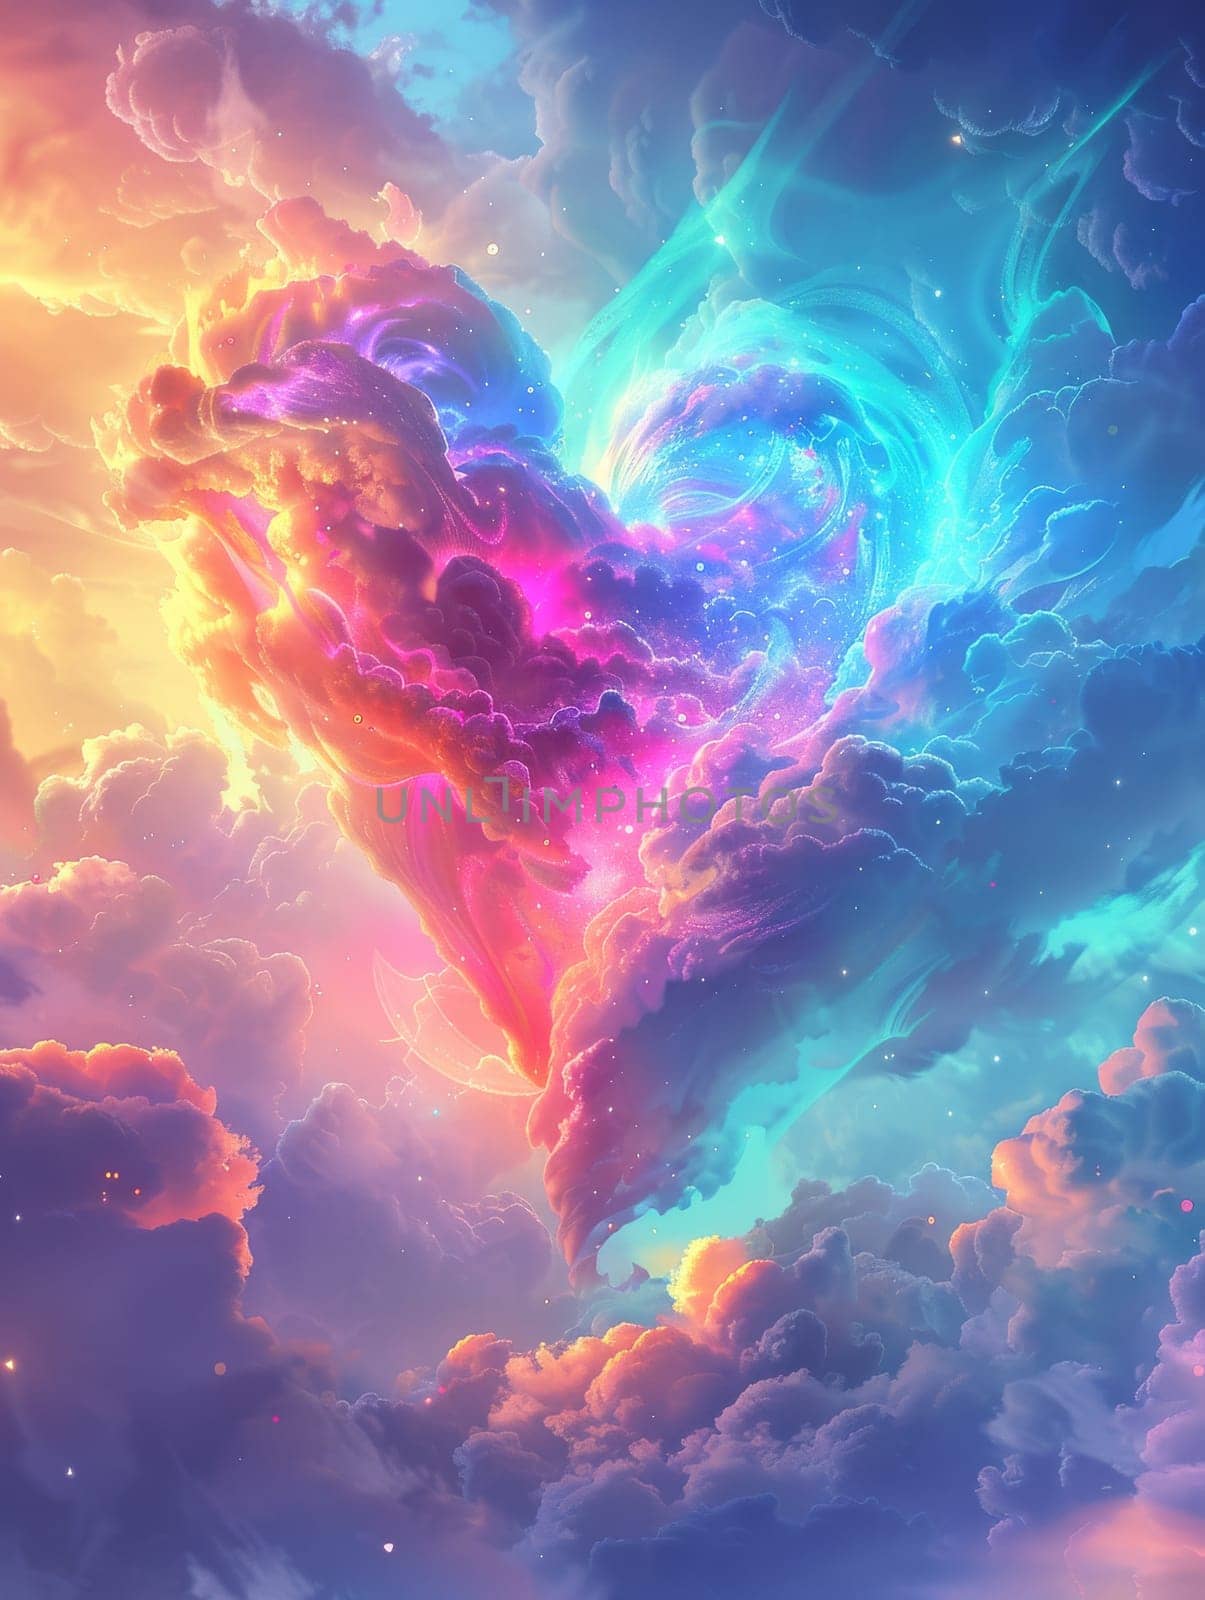 A colorful heart is surrounded by clouds in a sky. The heart is made up of different colors, and the clouds are also colorful. The image has a dreamy and whimsical mood